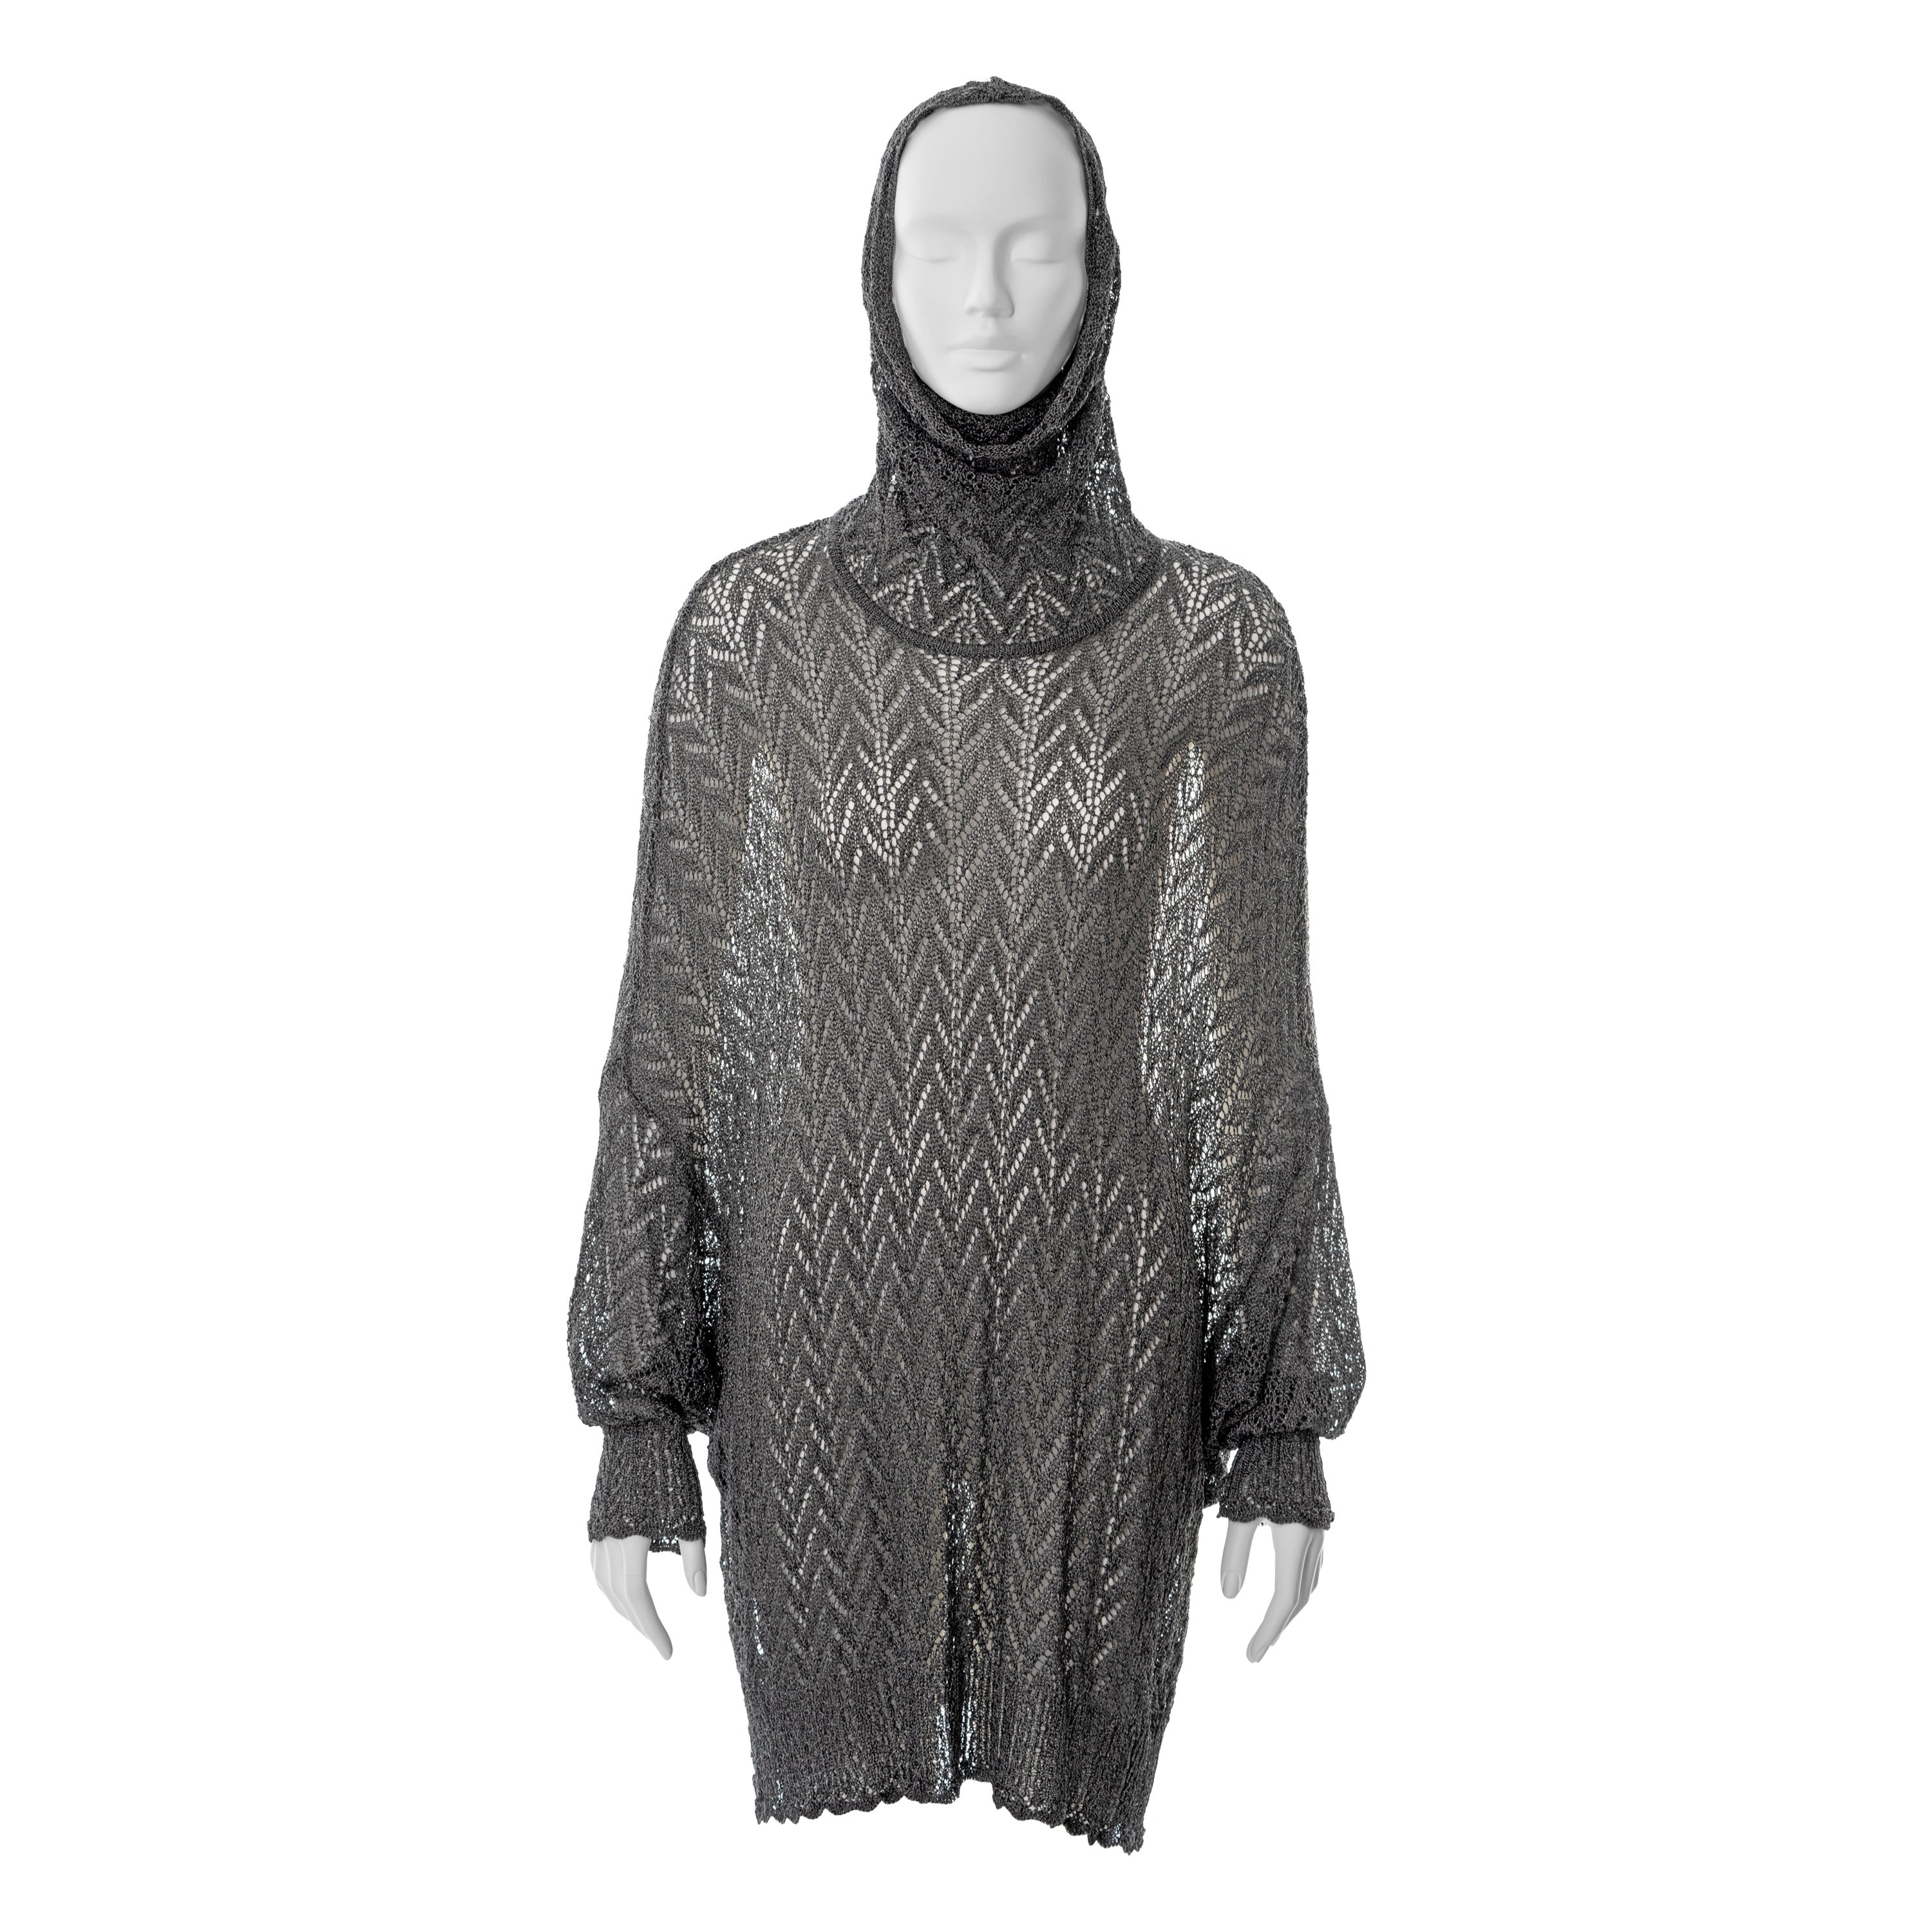 Christian Dior by John Galliano silver crochet sweater dress, fw 1998 For Sale